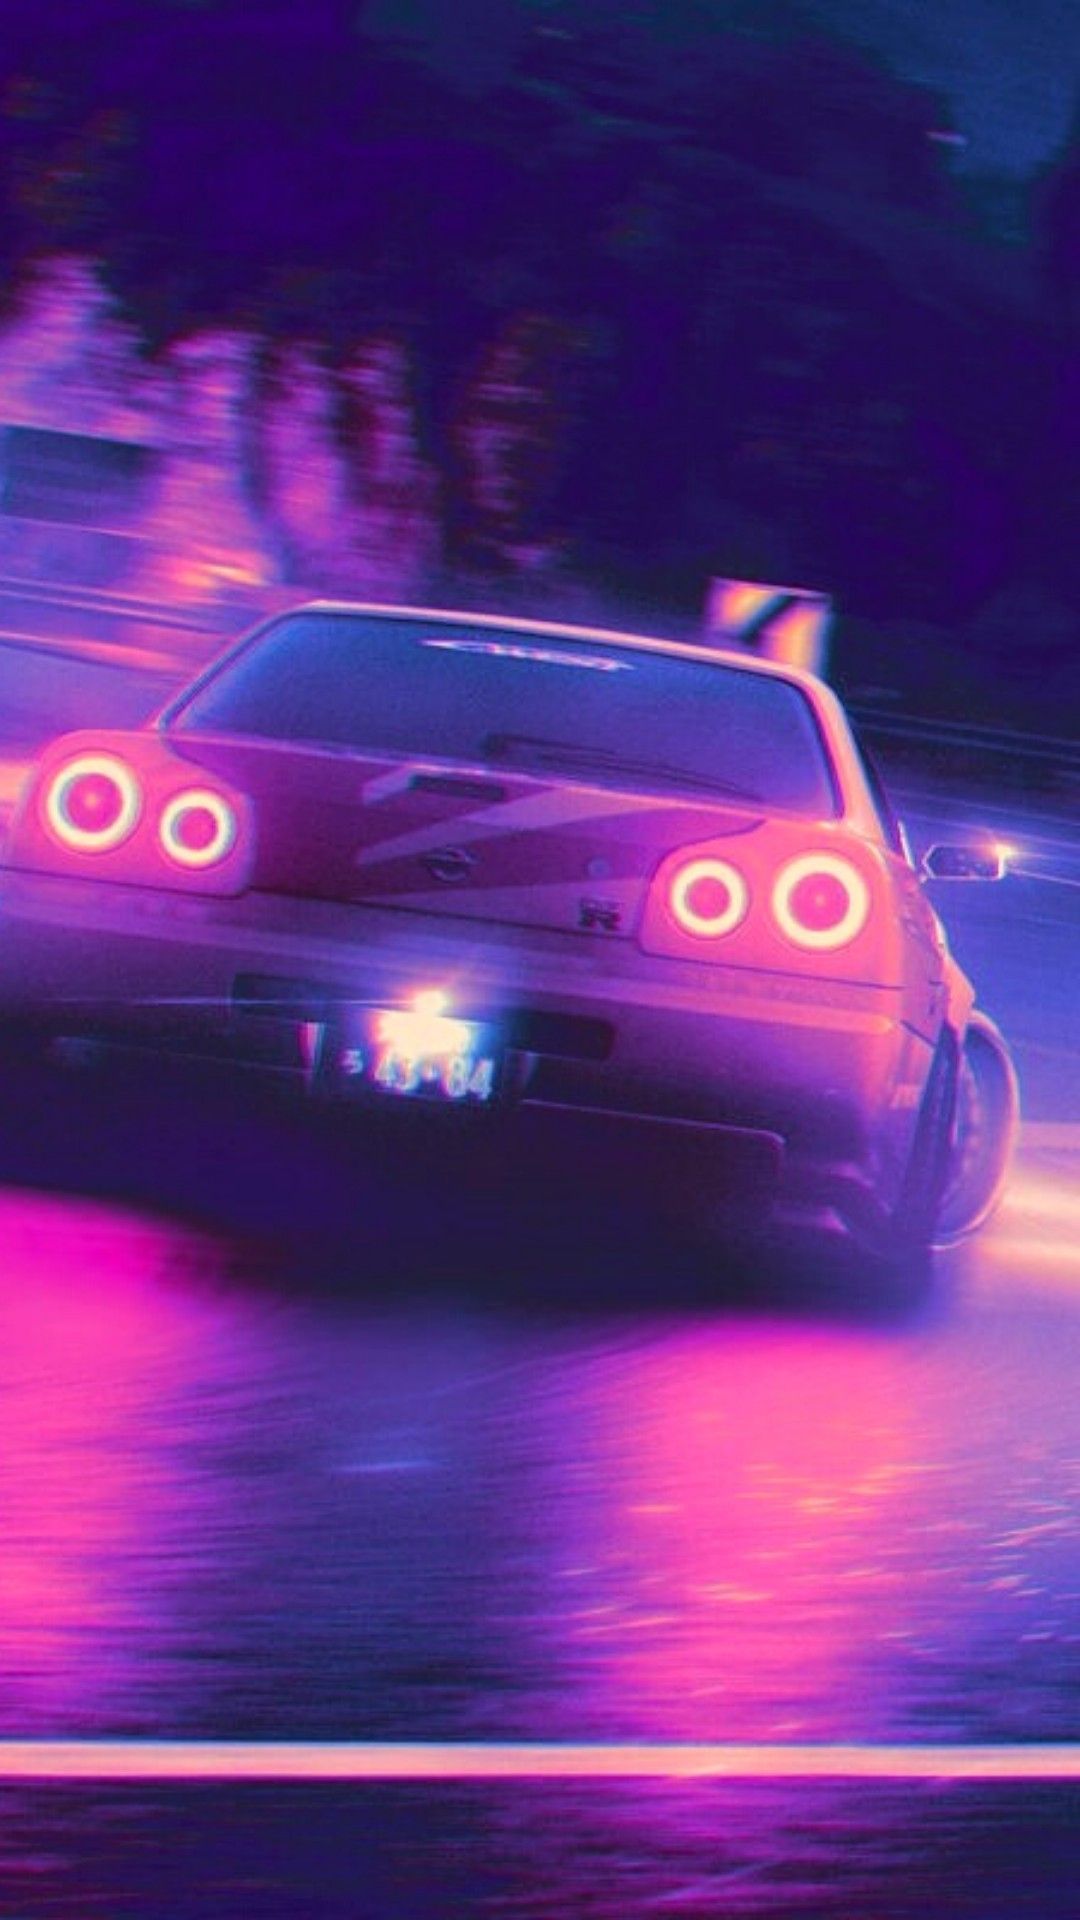 A car with pink lights on it - JDM, cars